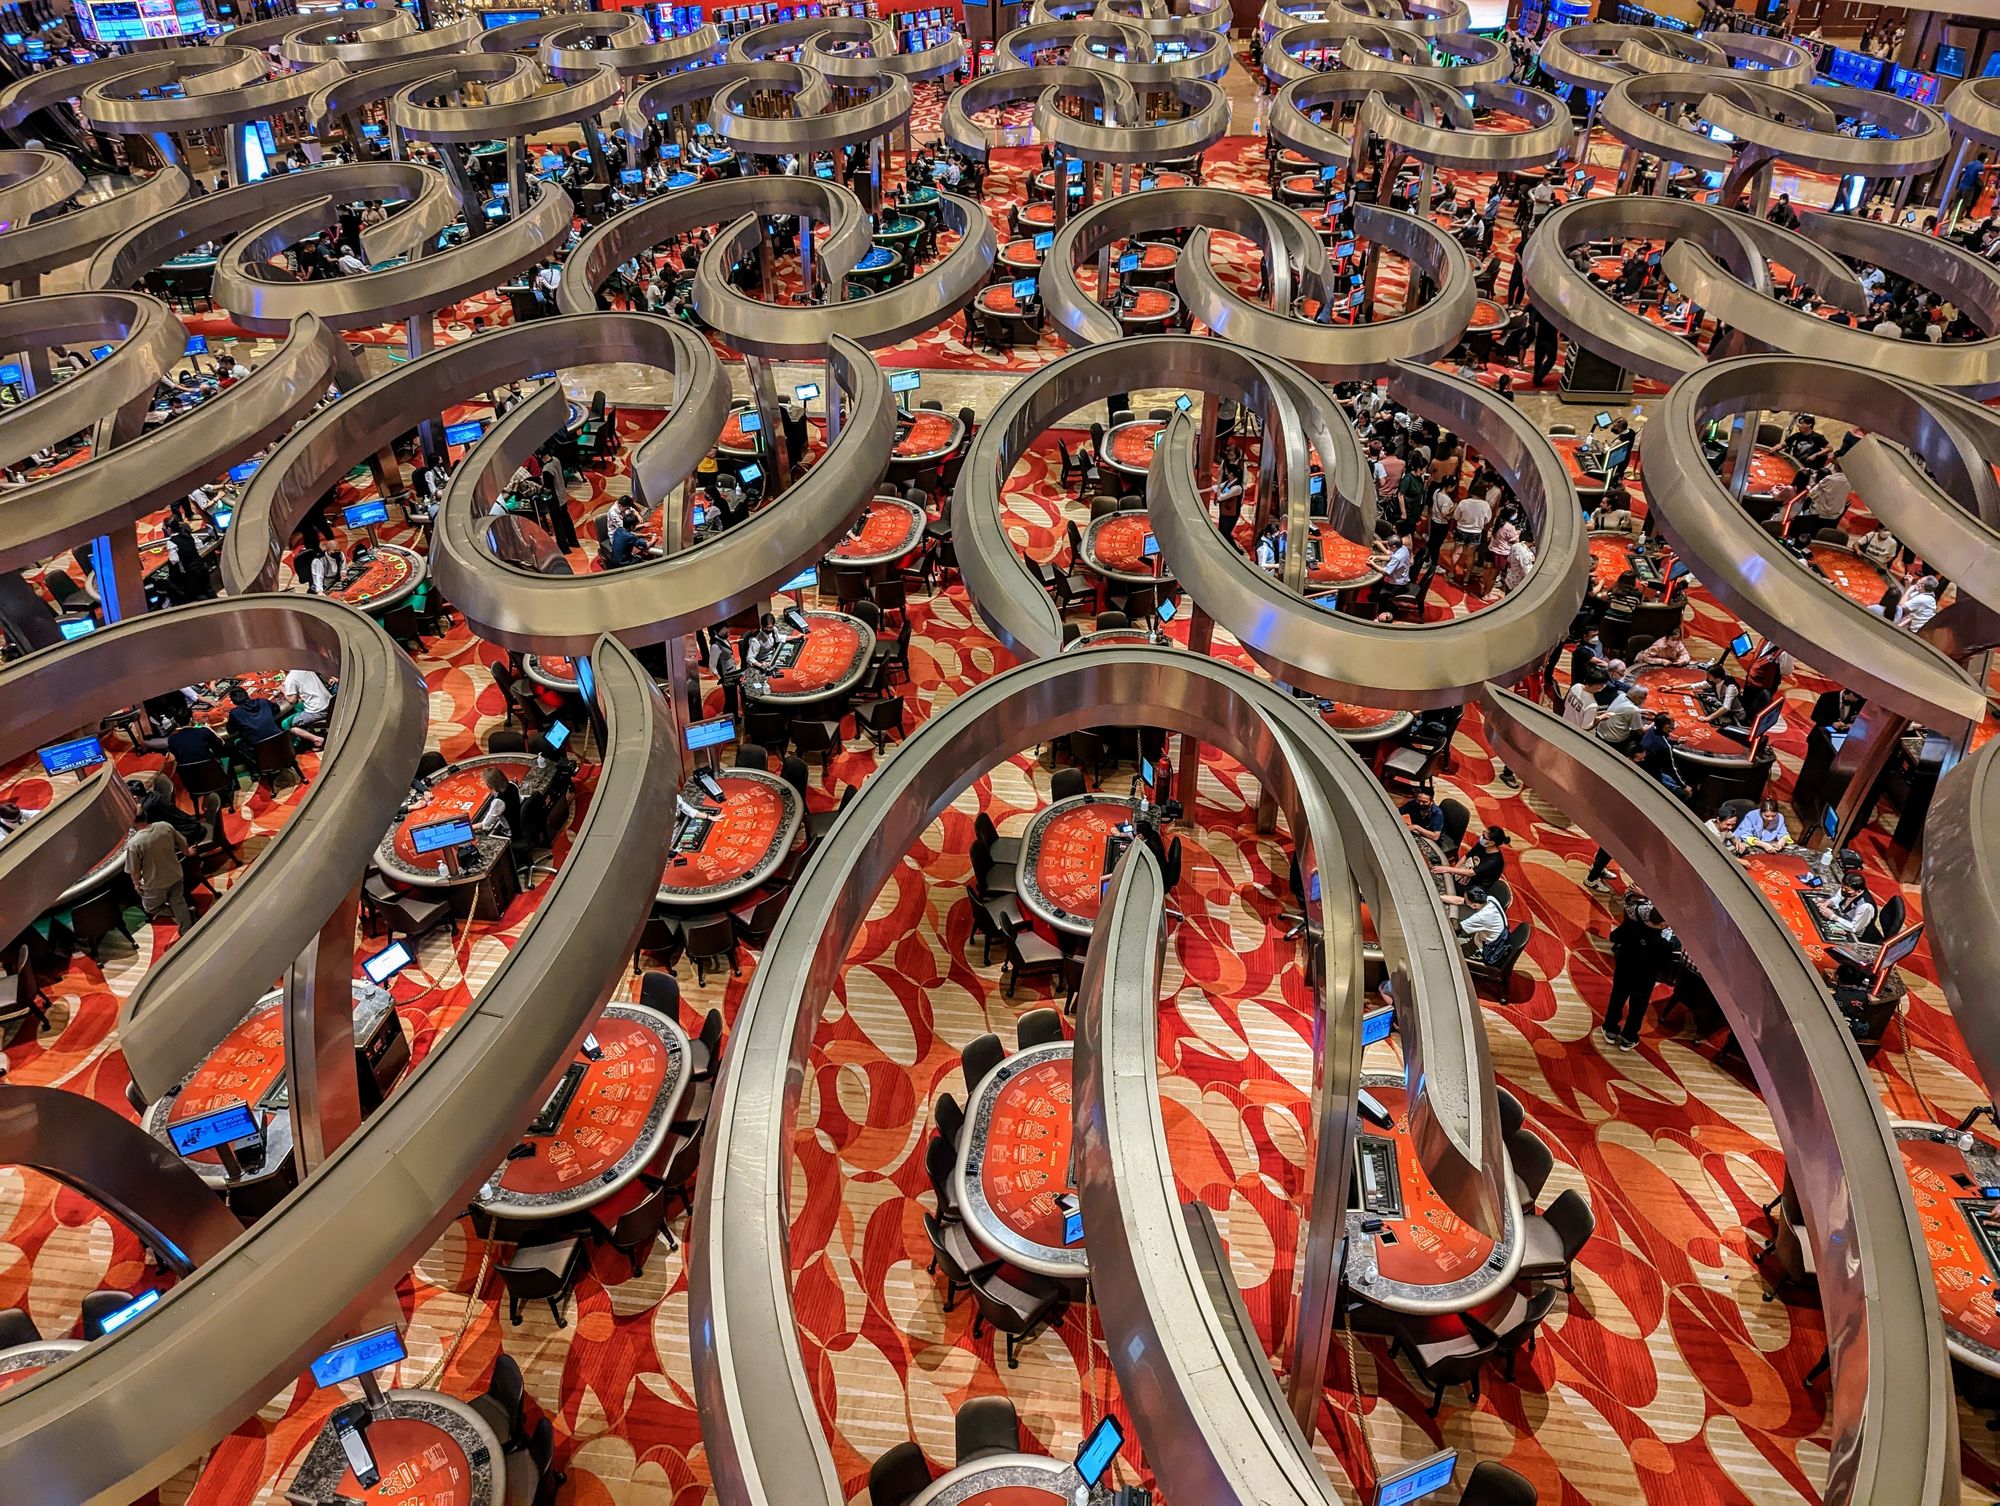 A casino floor seen from above, with striking golden lighting fixtures hanging over many gambling tables and a striking red carpet.